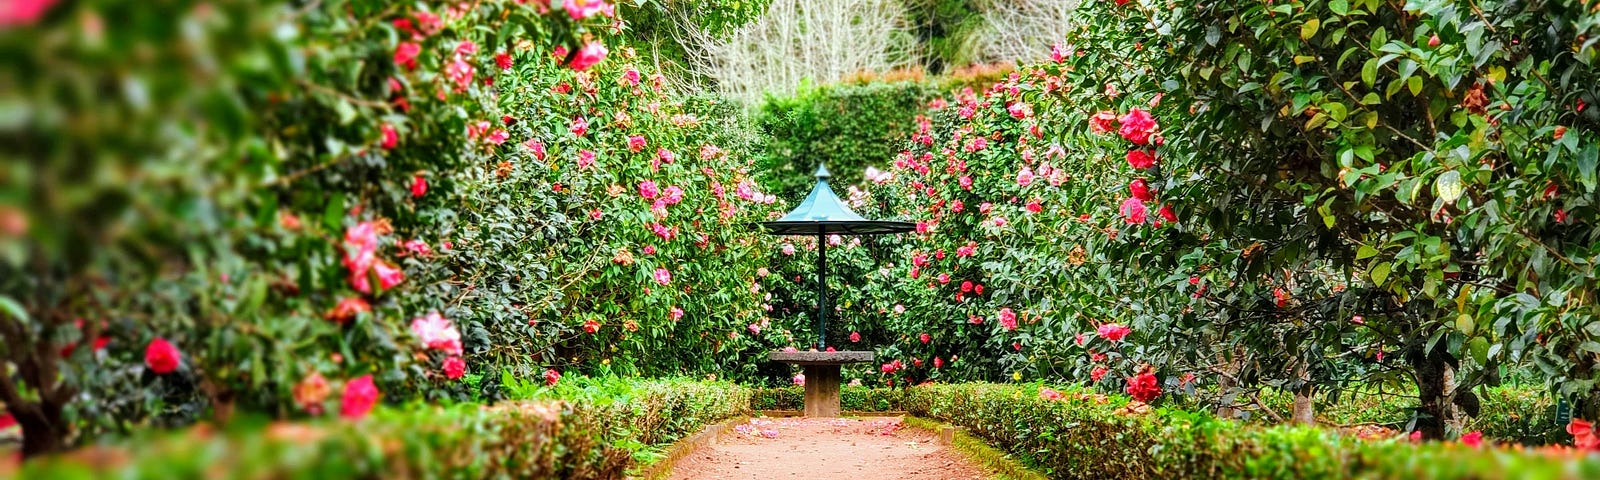 A garden path between hedges with pinkish red roses